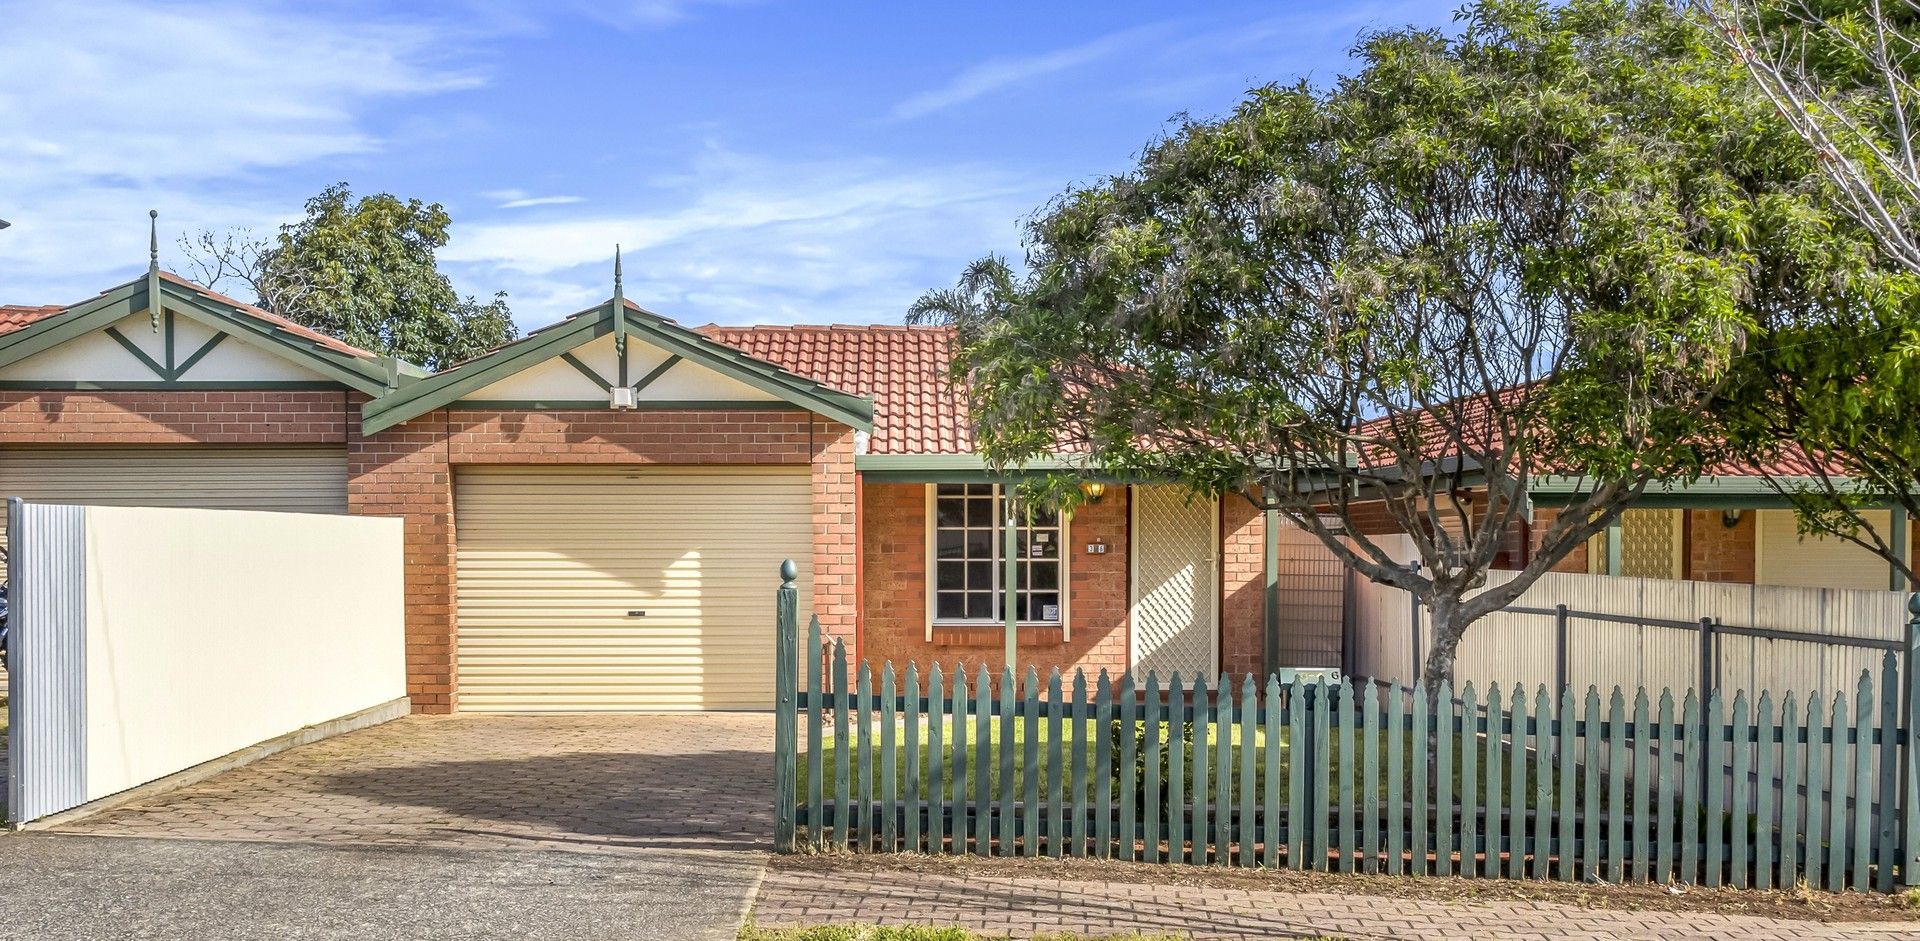 2 bedrooms House in 3/6 Downer Avenue CAMPBELLTOWN SA, 5074